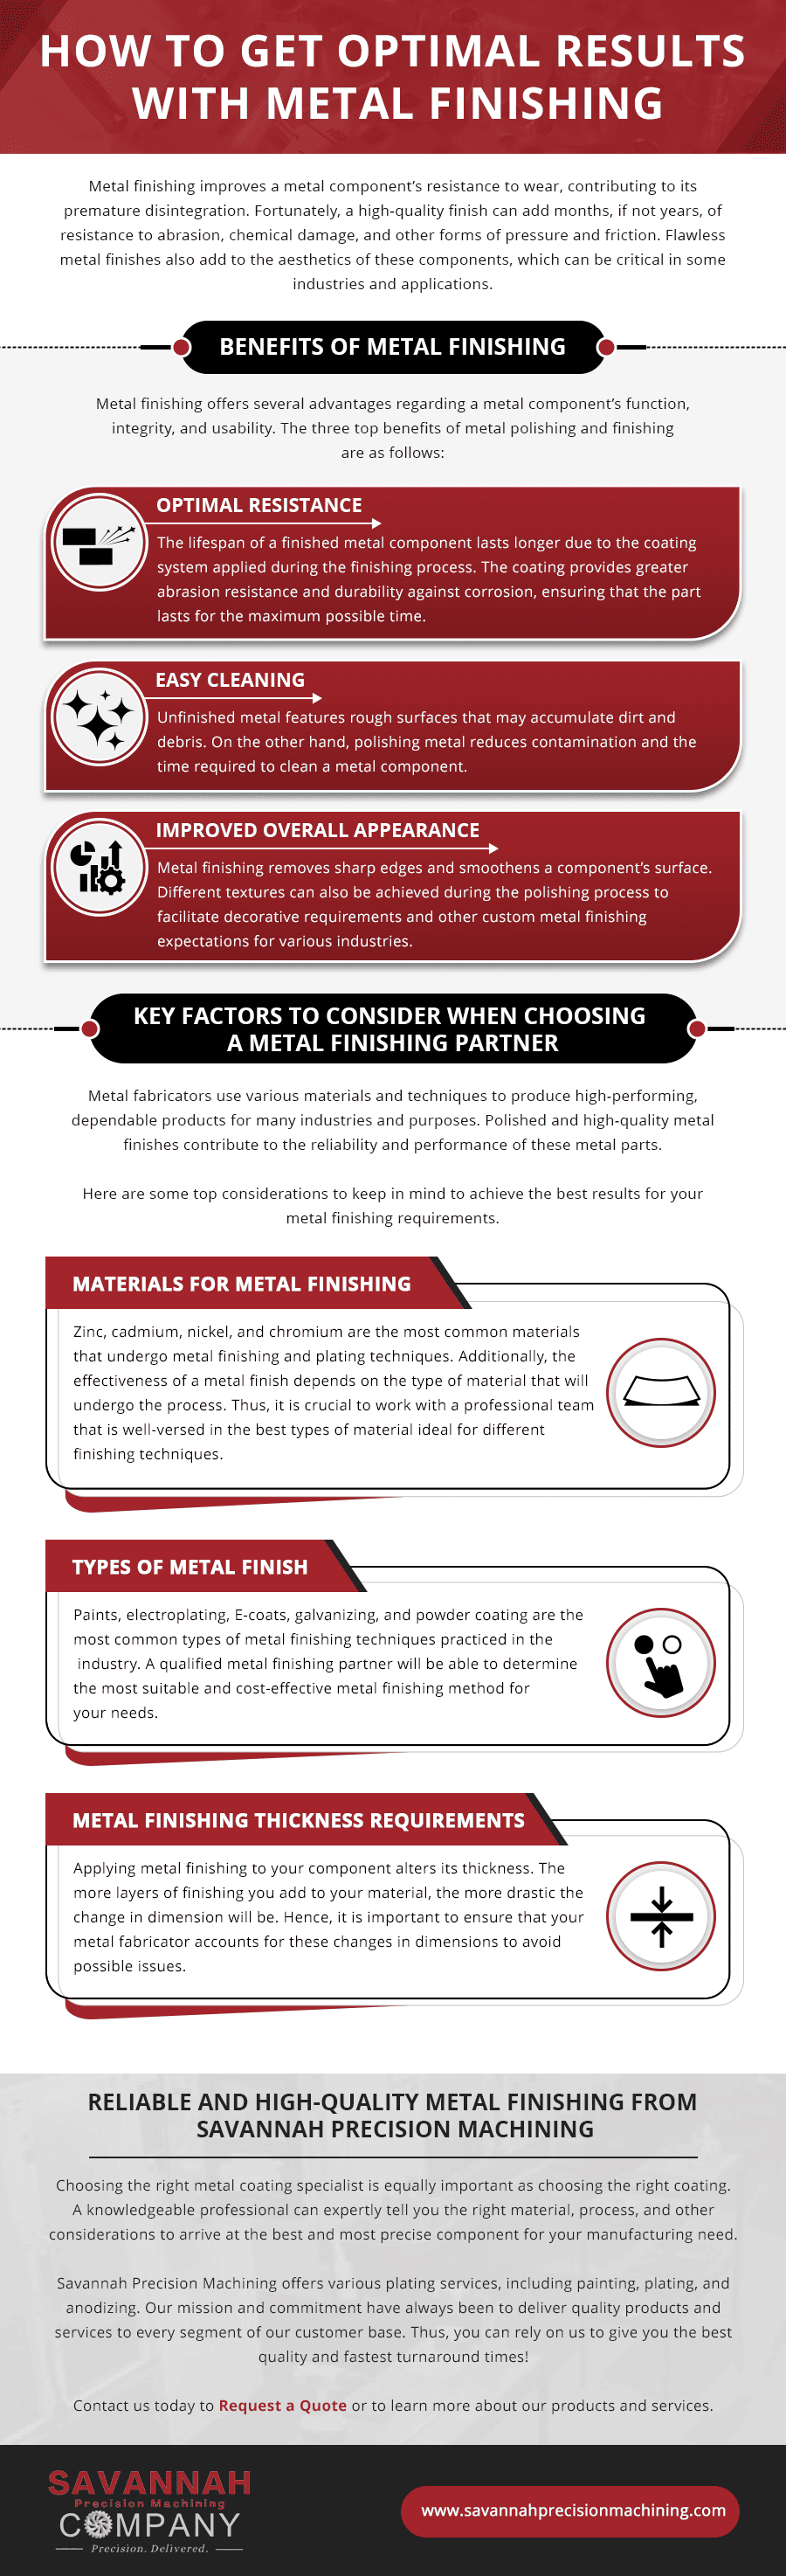 How-to-Get-Optimal-Results-with-Metal-Finishing